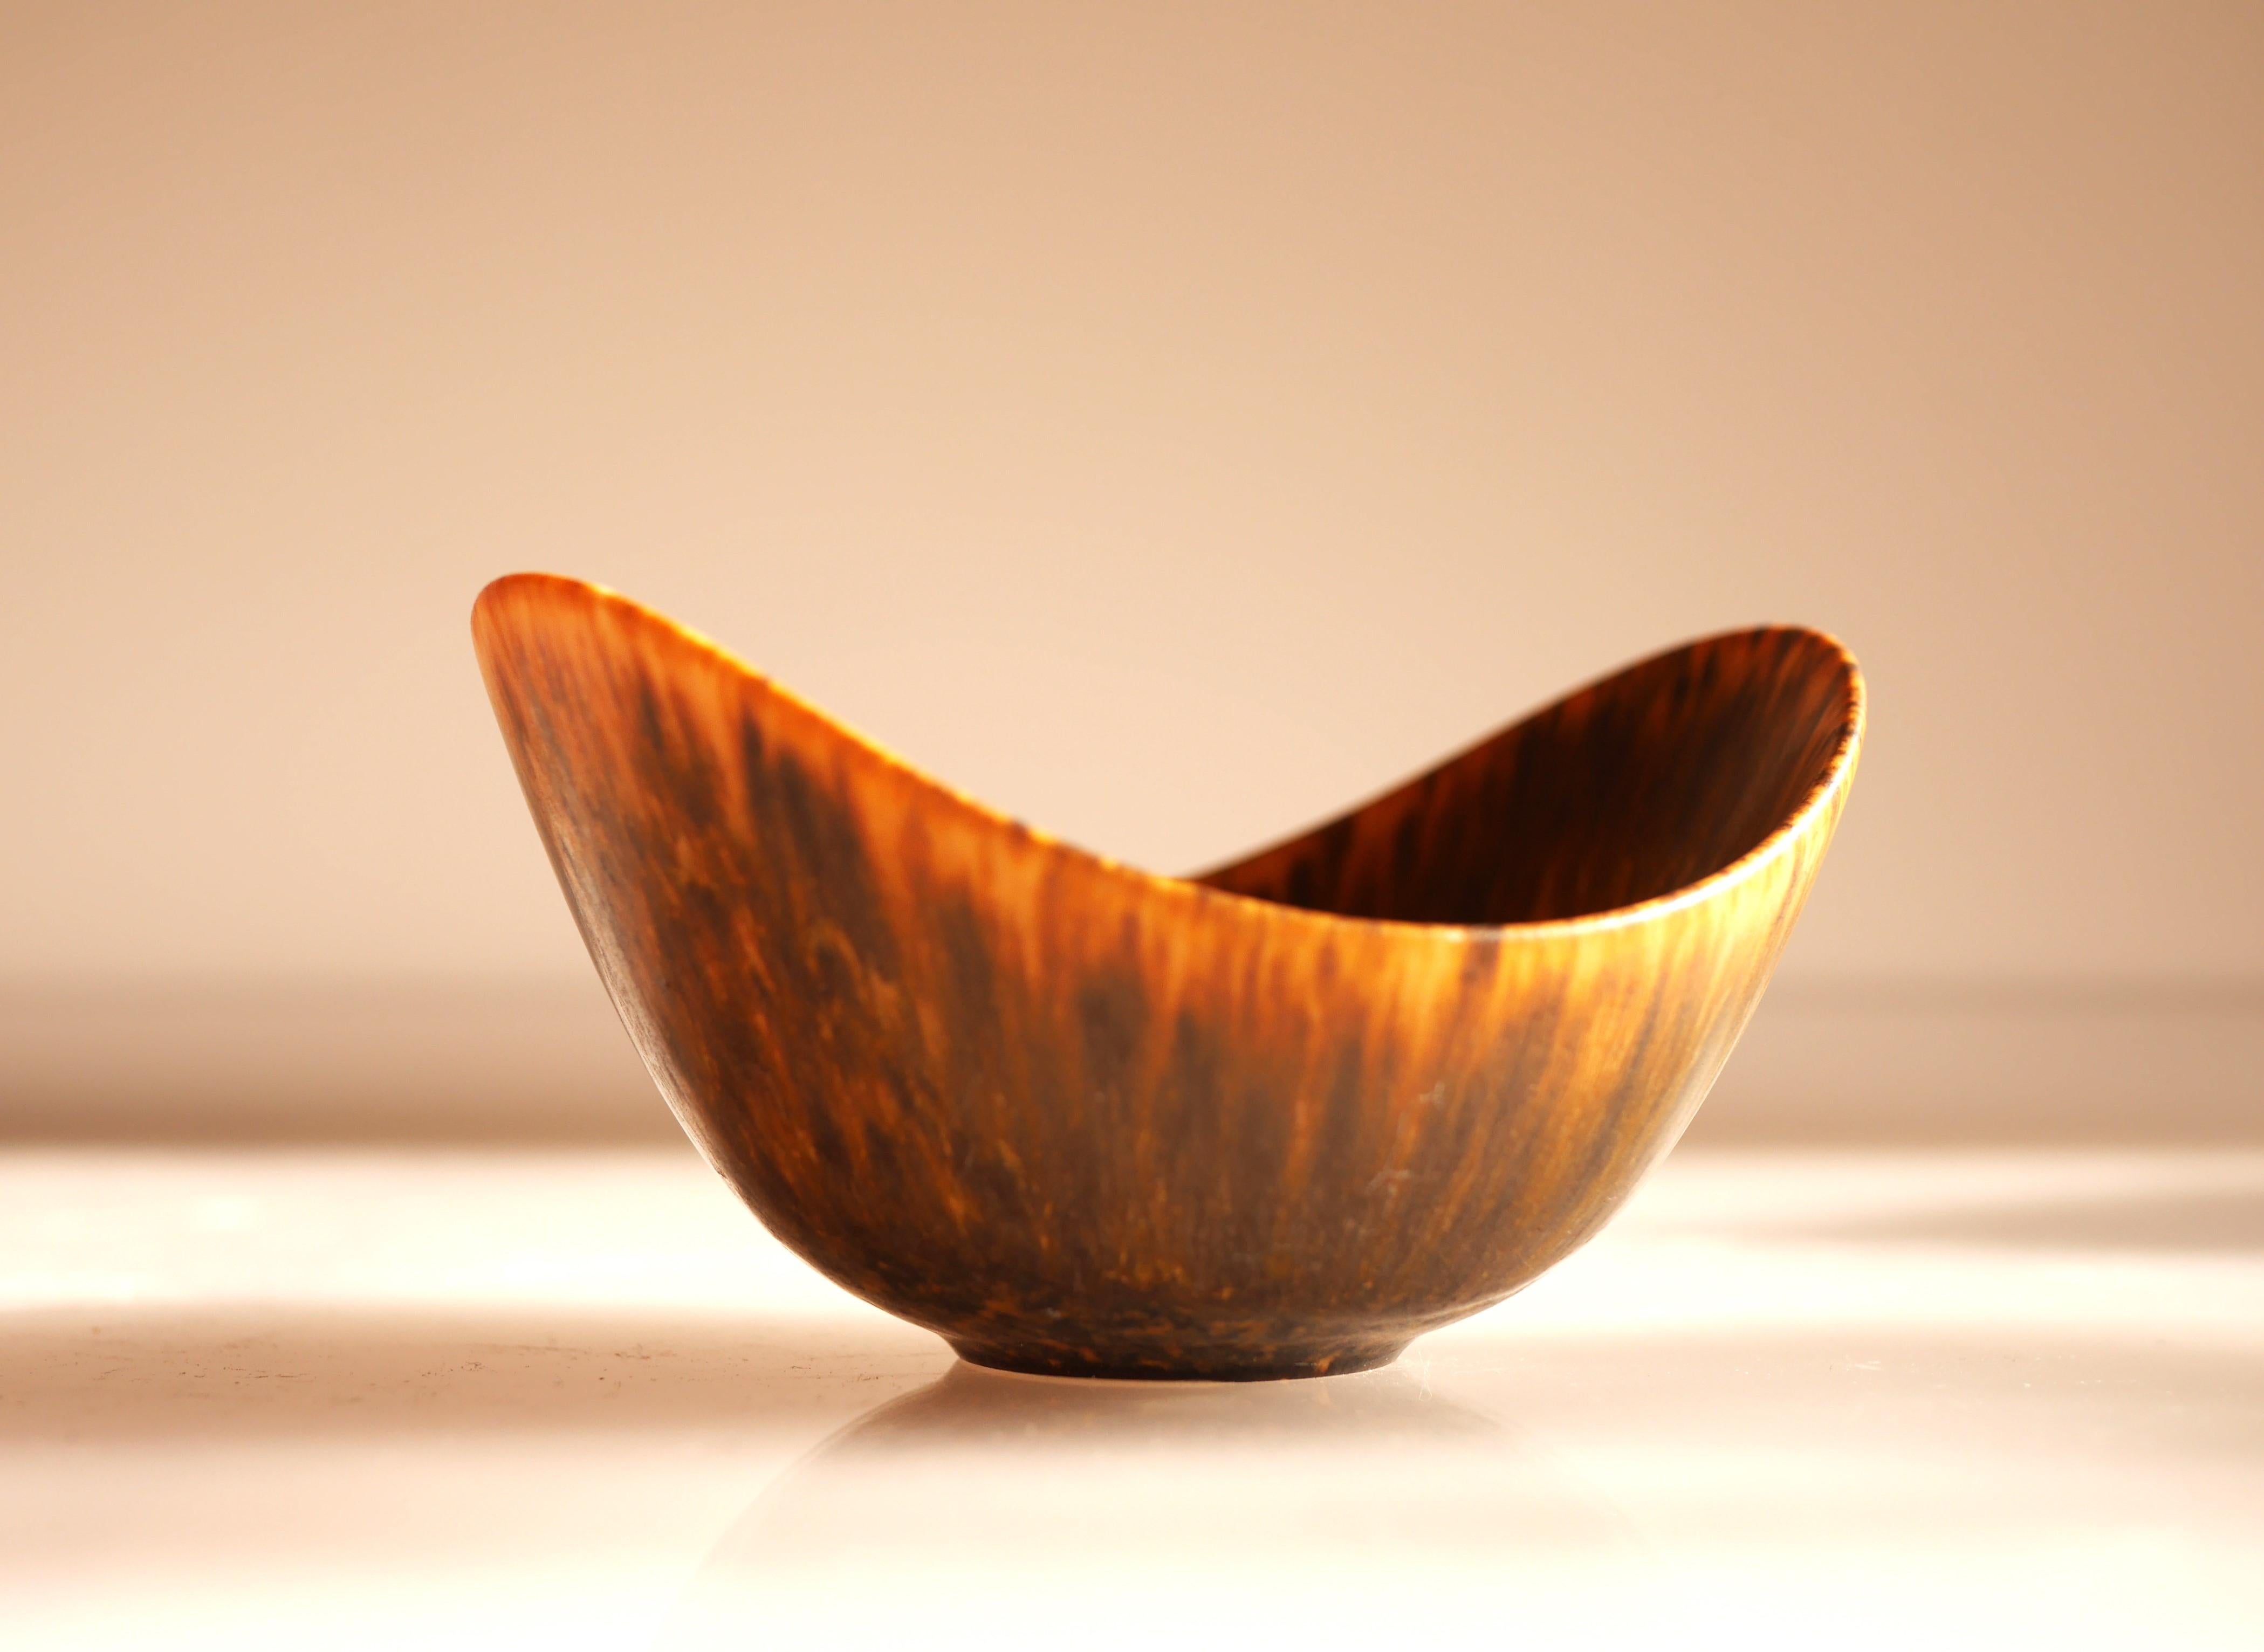 A stunning hand-made vintage miniature stoneware pottery bowl with a classic design known as 